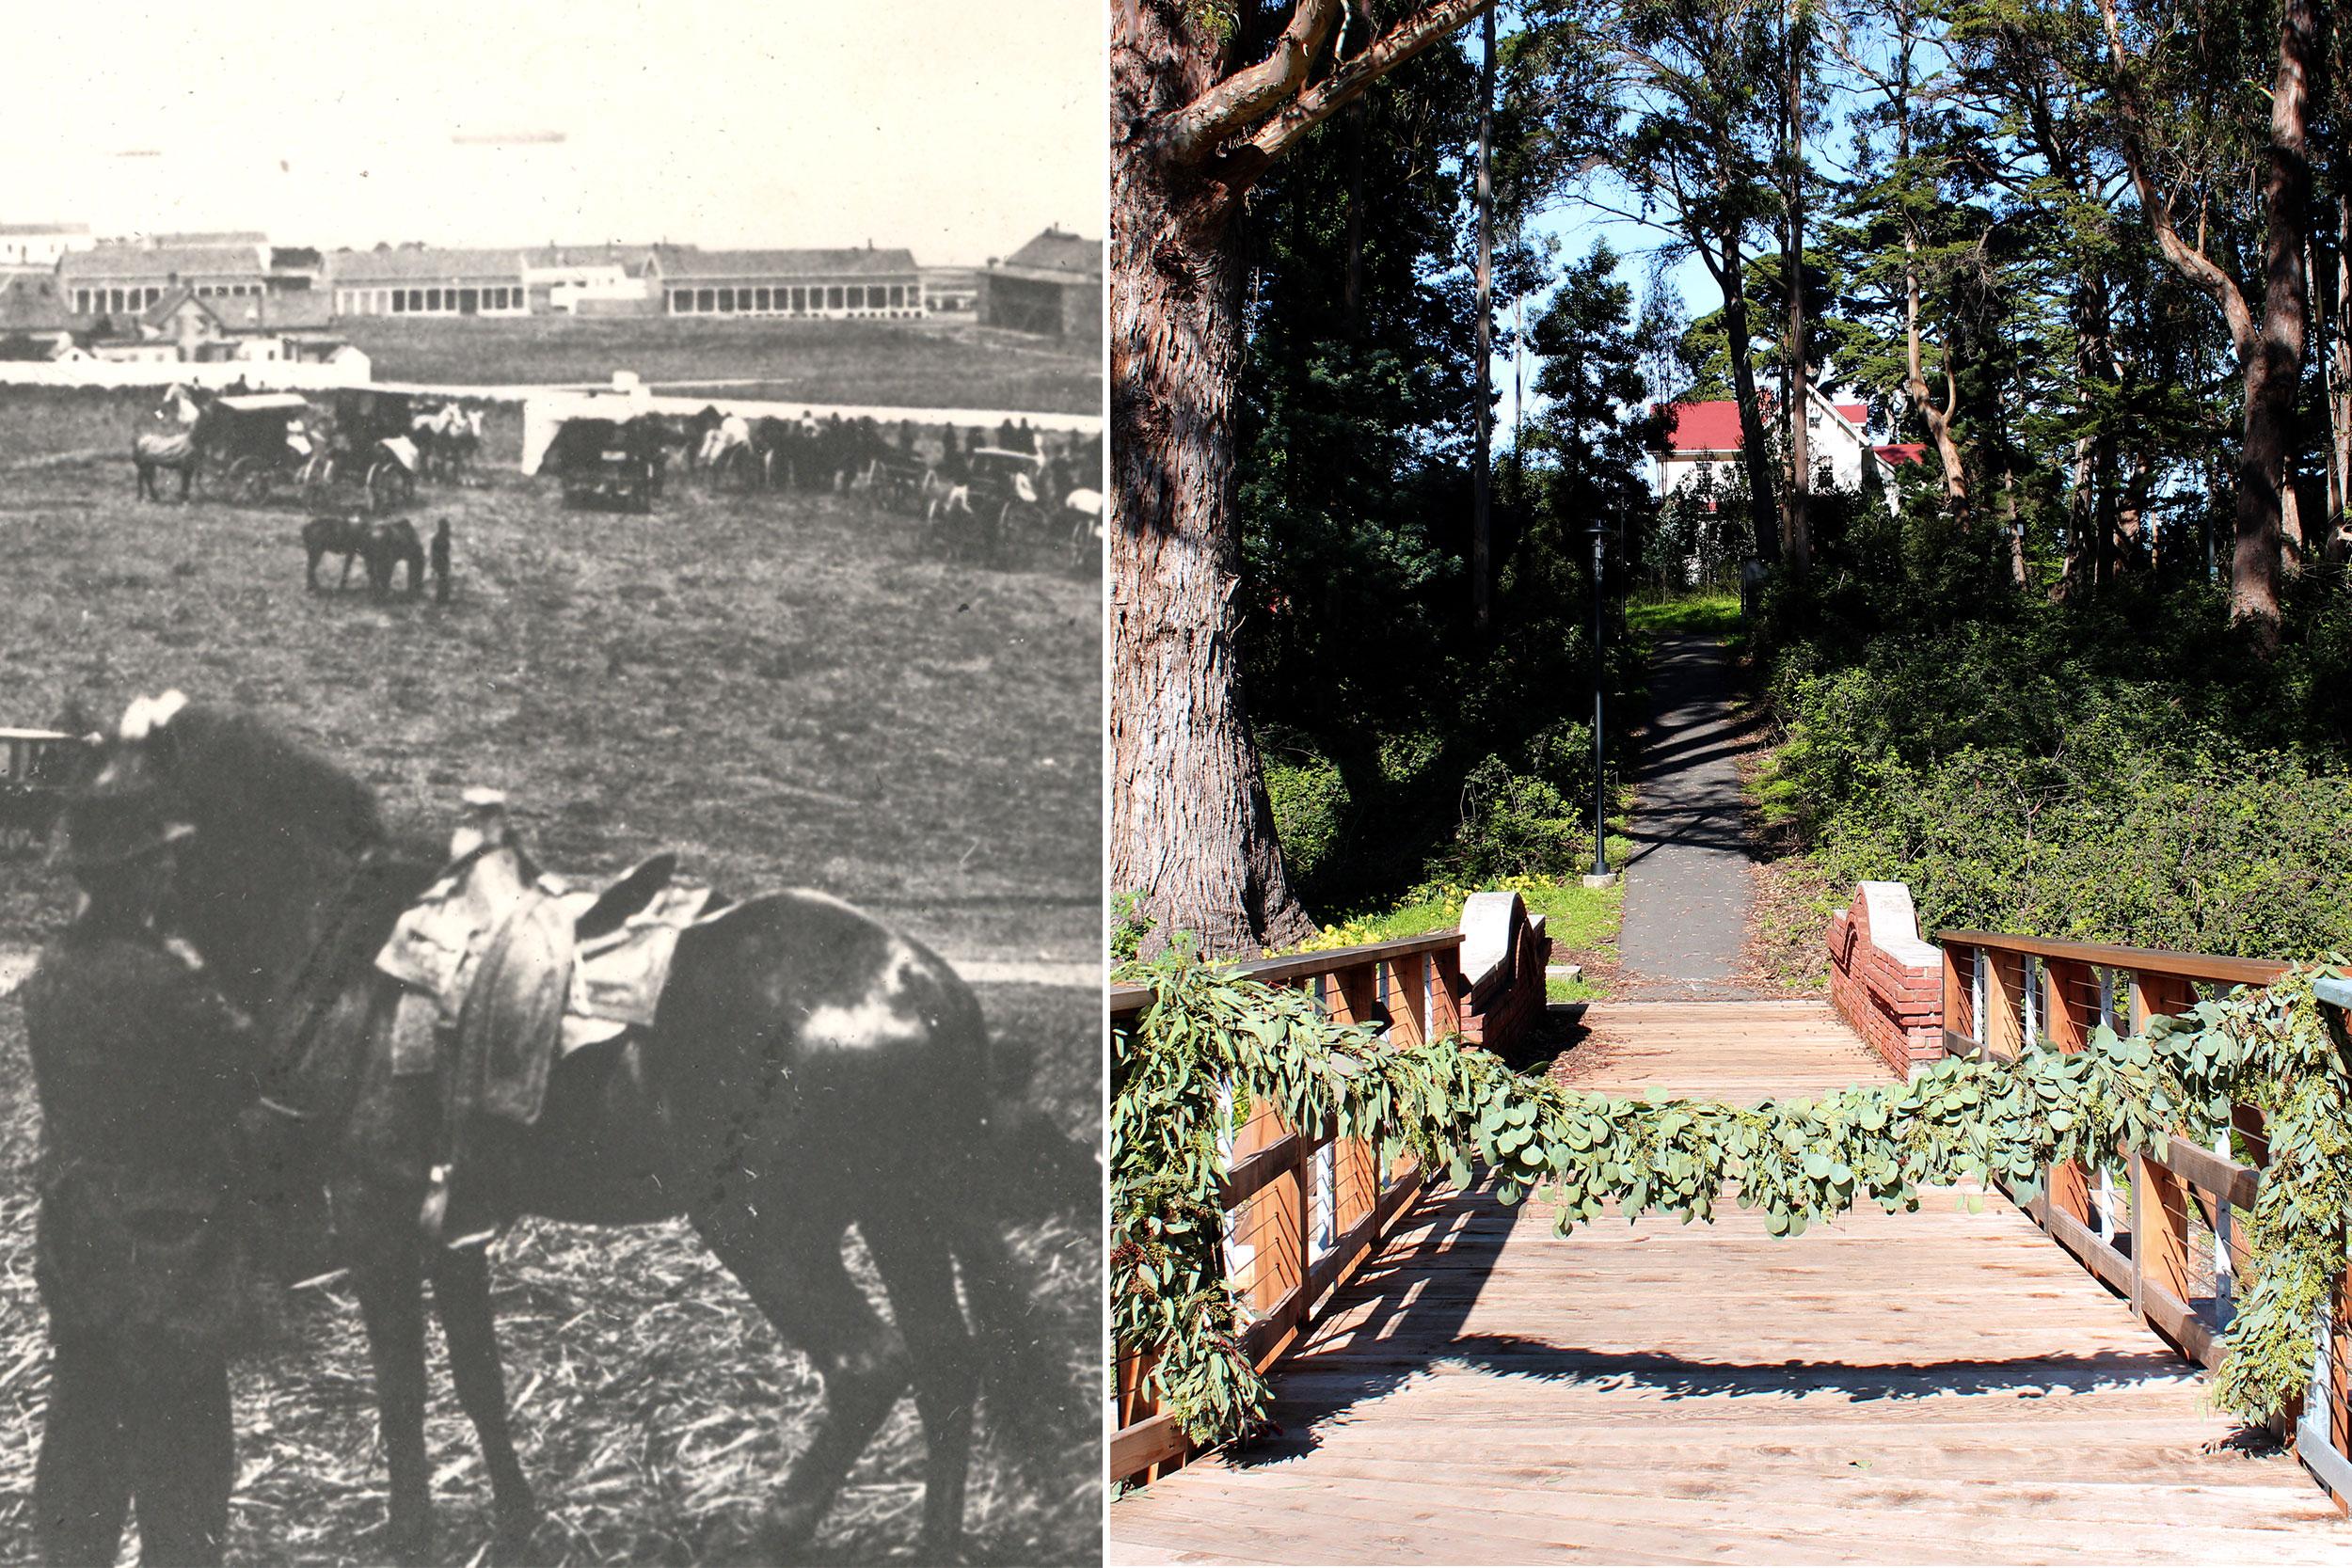 MacArthur Meadow then as a racetrack and now as a trail